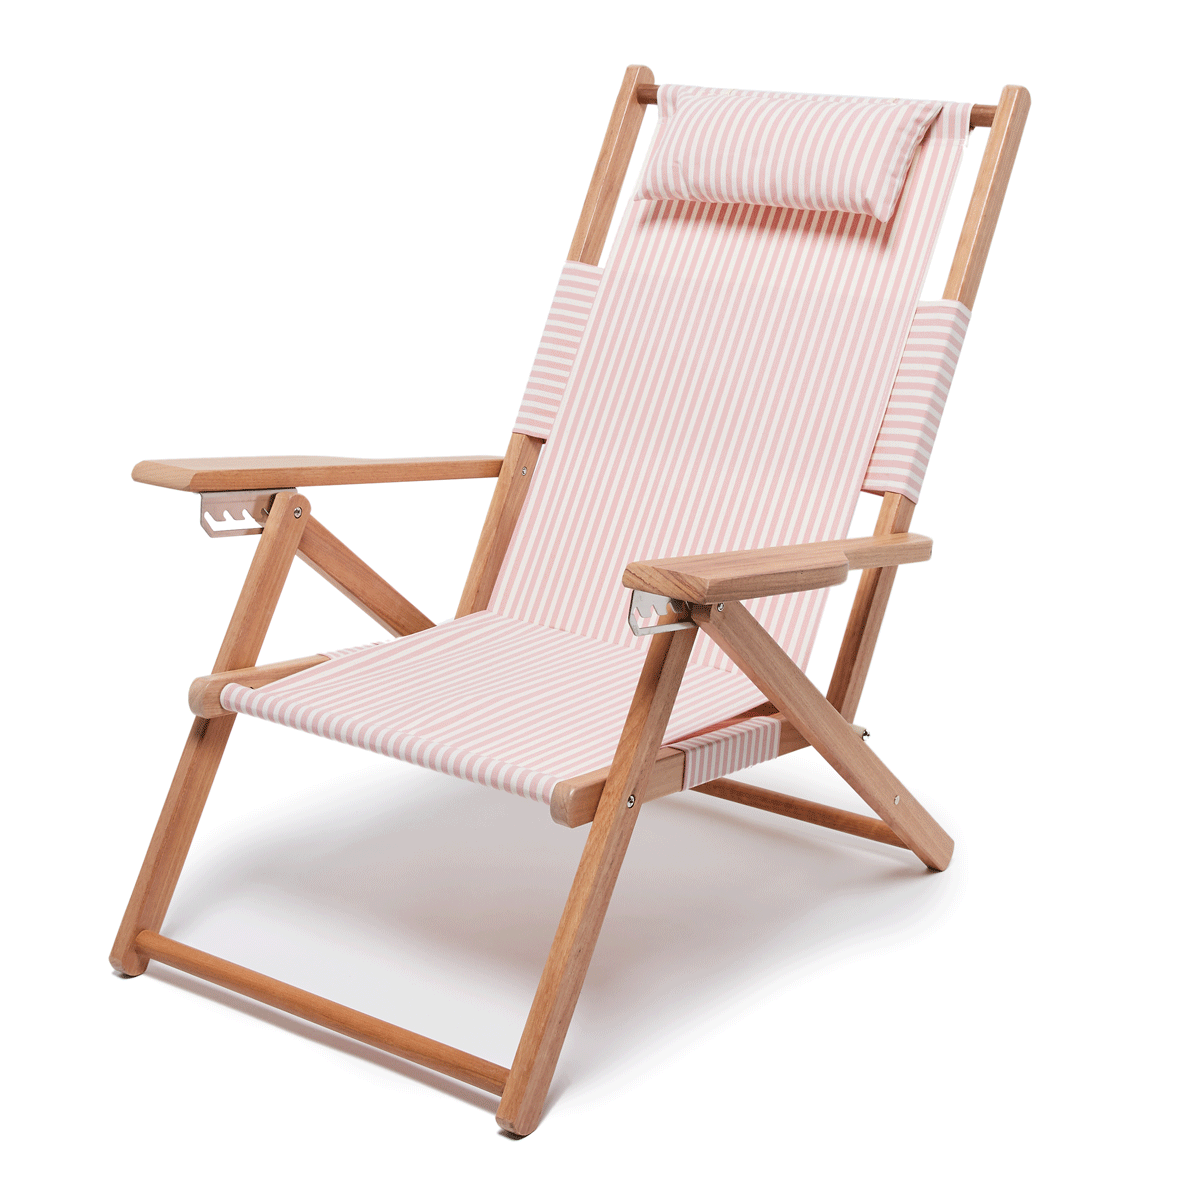 The Tommy Chair - Lauren's Pink Stripe Tommy Chair Business & Pleasure Co 